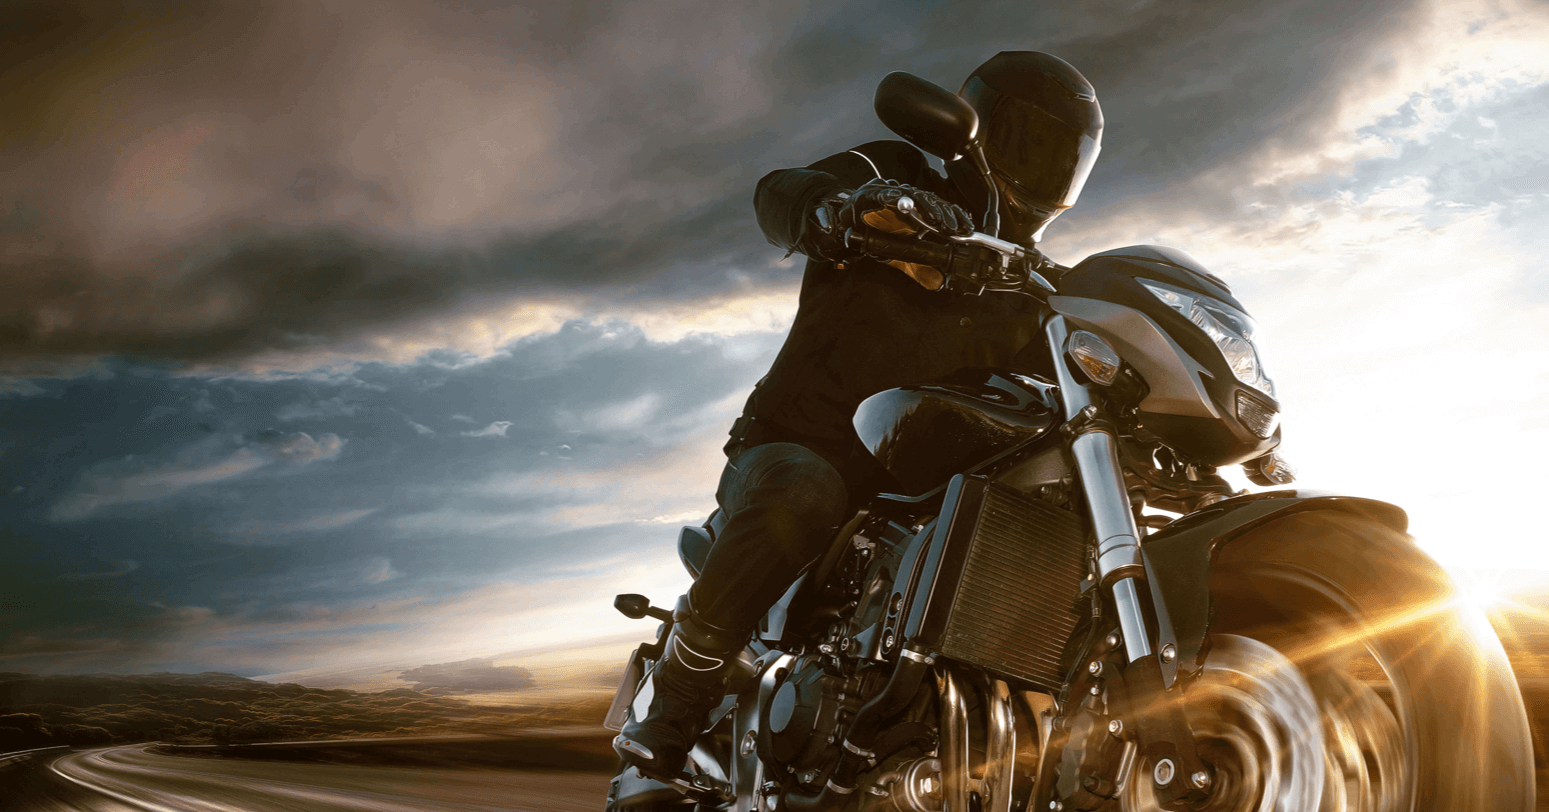 Motorcycle Insurance For New Riders Swann Insurance intended for dimensions 1549 X 812